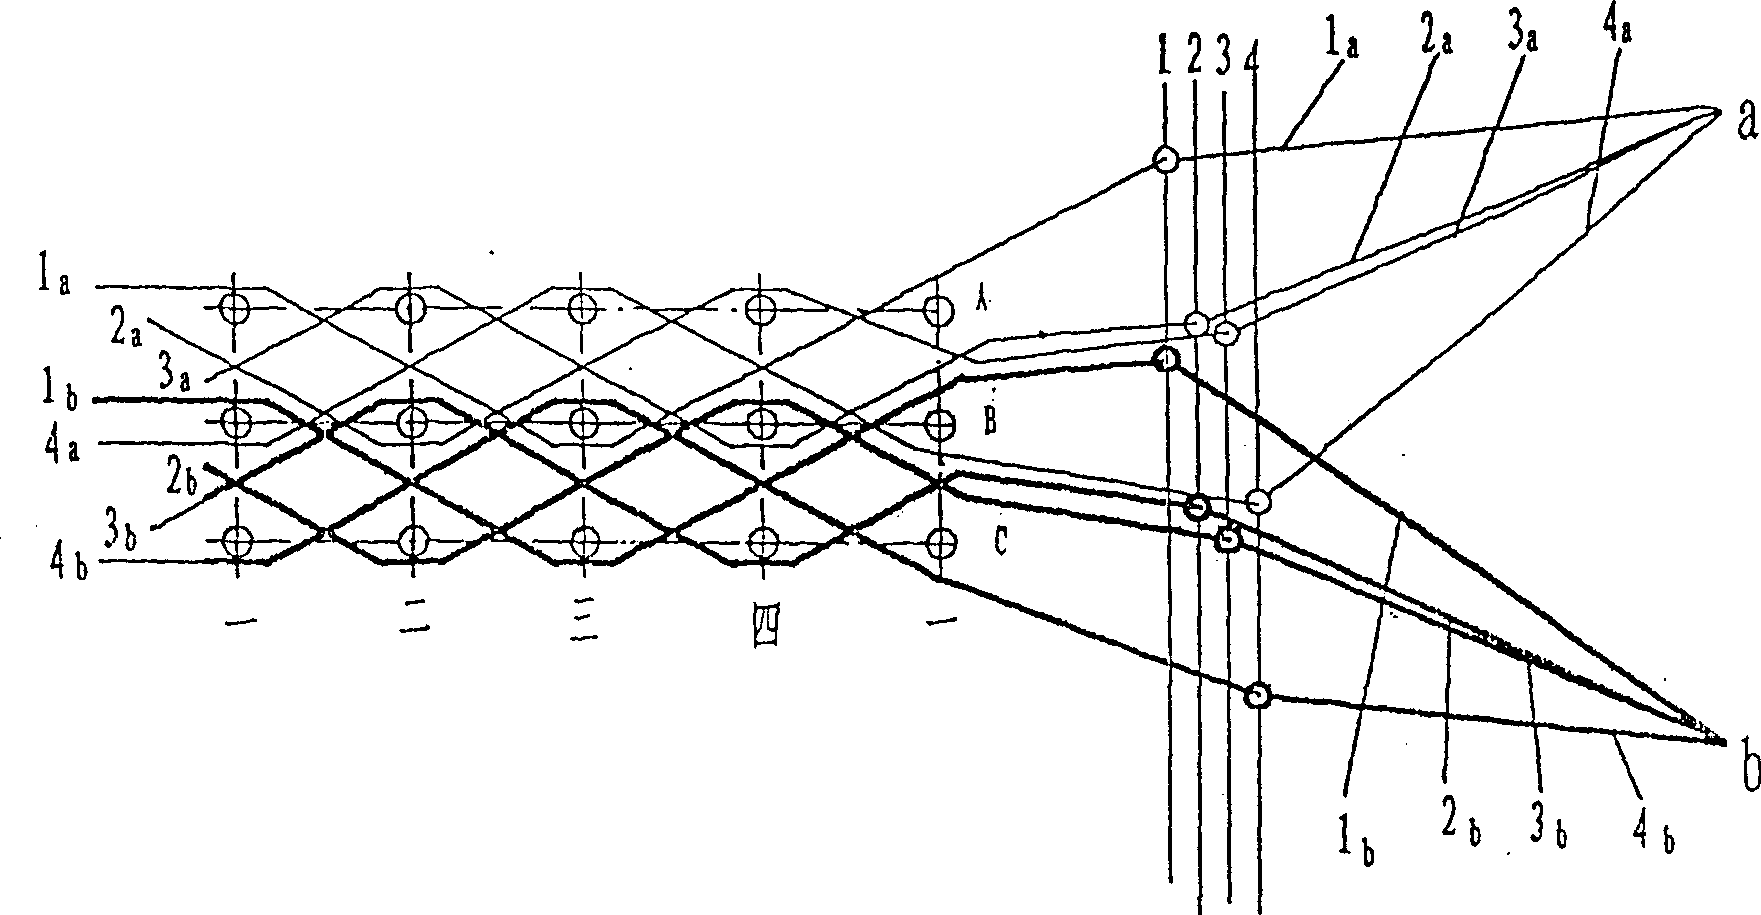 Band core weaving method of solid core apron band